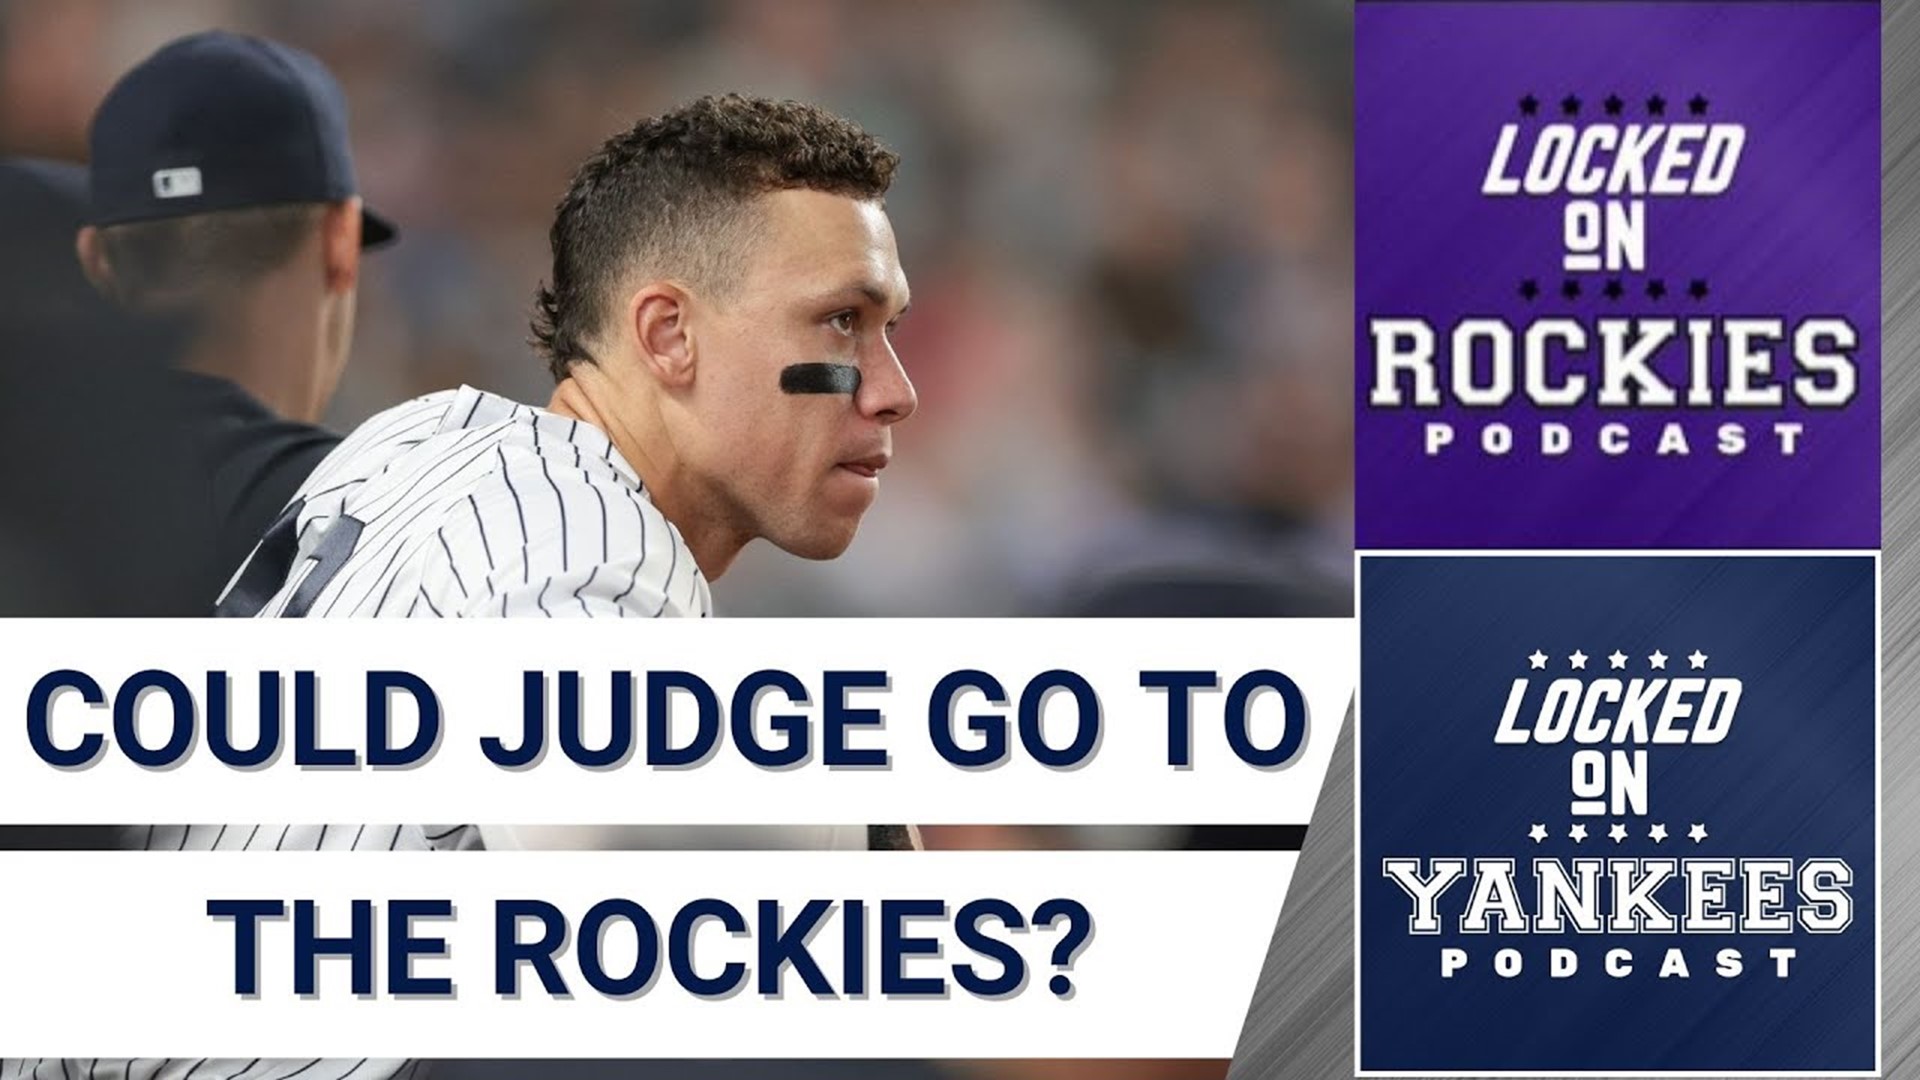 Stacey joined Paul Holden of Locked On Rockies to talk about Aaron Judge. The Rockies signed a big free agent last year, so what's stopping them from doing the same?